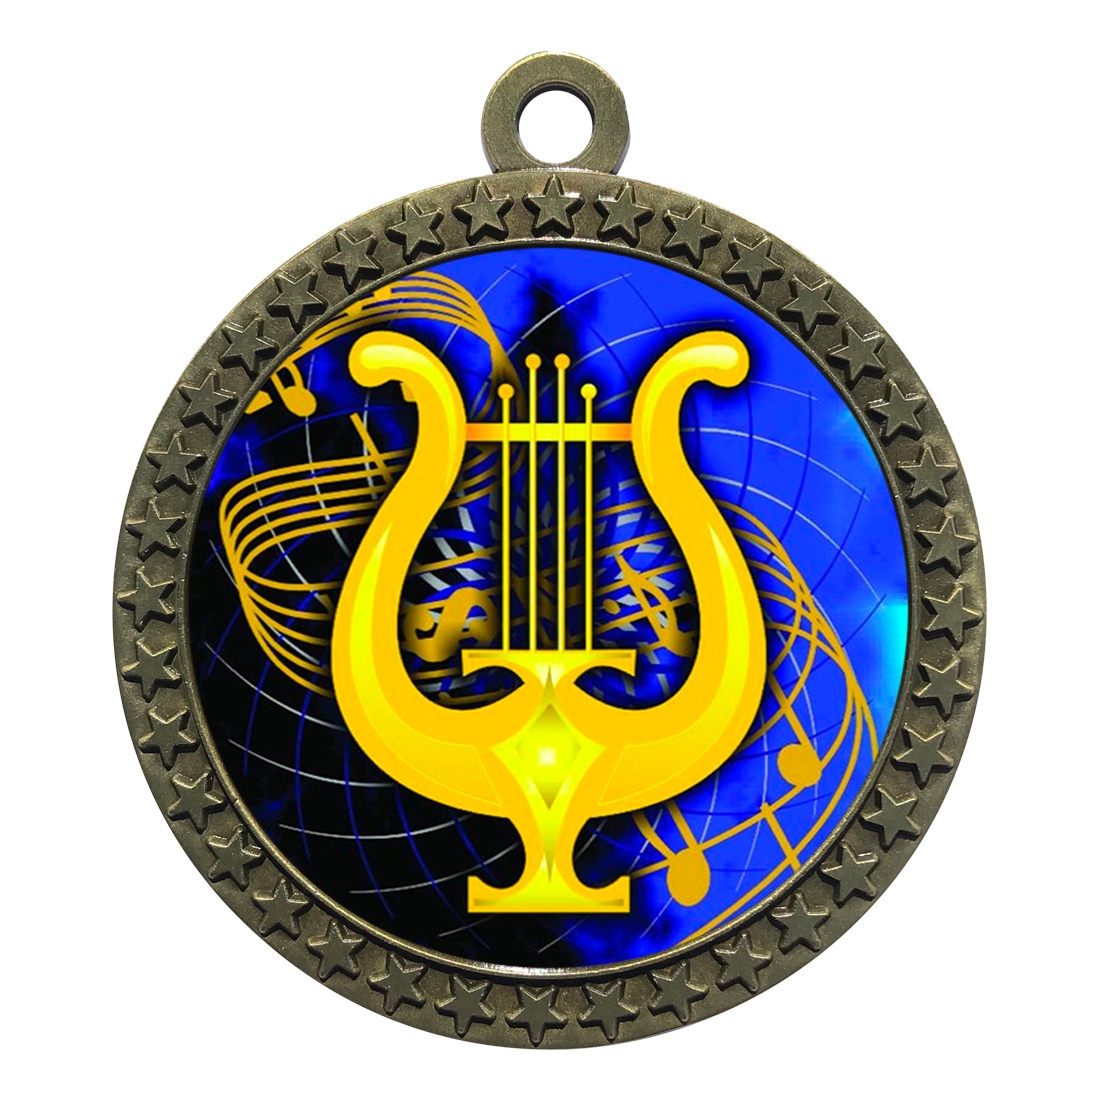 2 Gold Piano Recital Music Medal Award with Free Custom Engraving Piano Medals